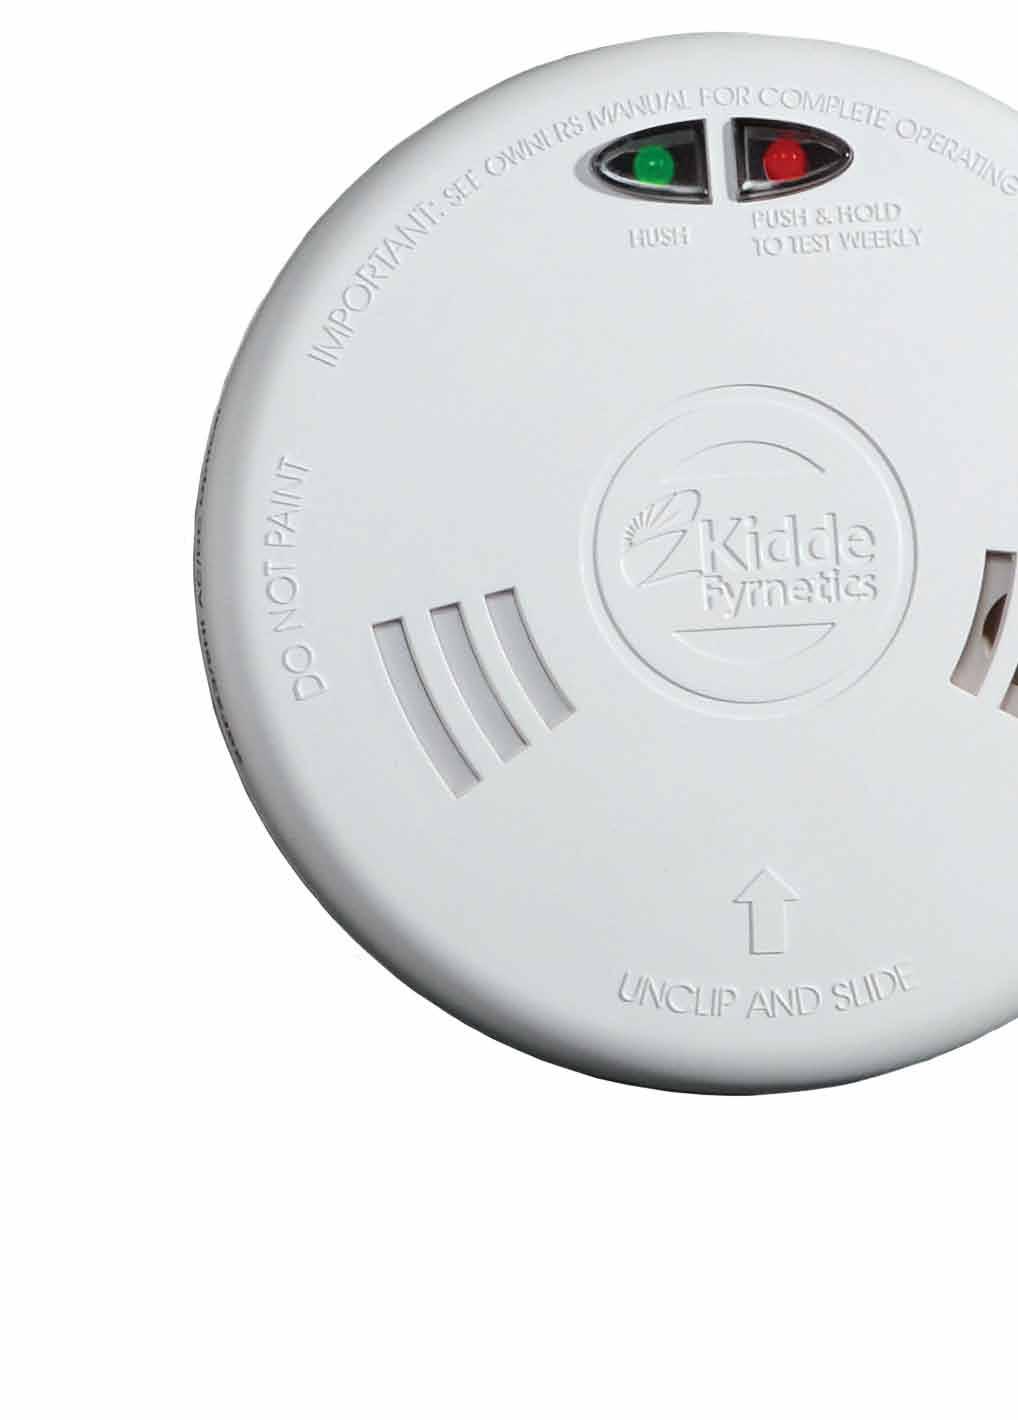 Models 2SFWR and 2SFW 230V Mains Fast-Fit Optical Smoke Alarms Technical Specification Sensor Chamber Size Optical chamber with insect resistant width slot entry inlet portals 41mm outside diameter x